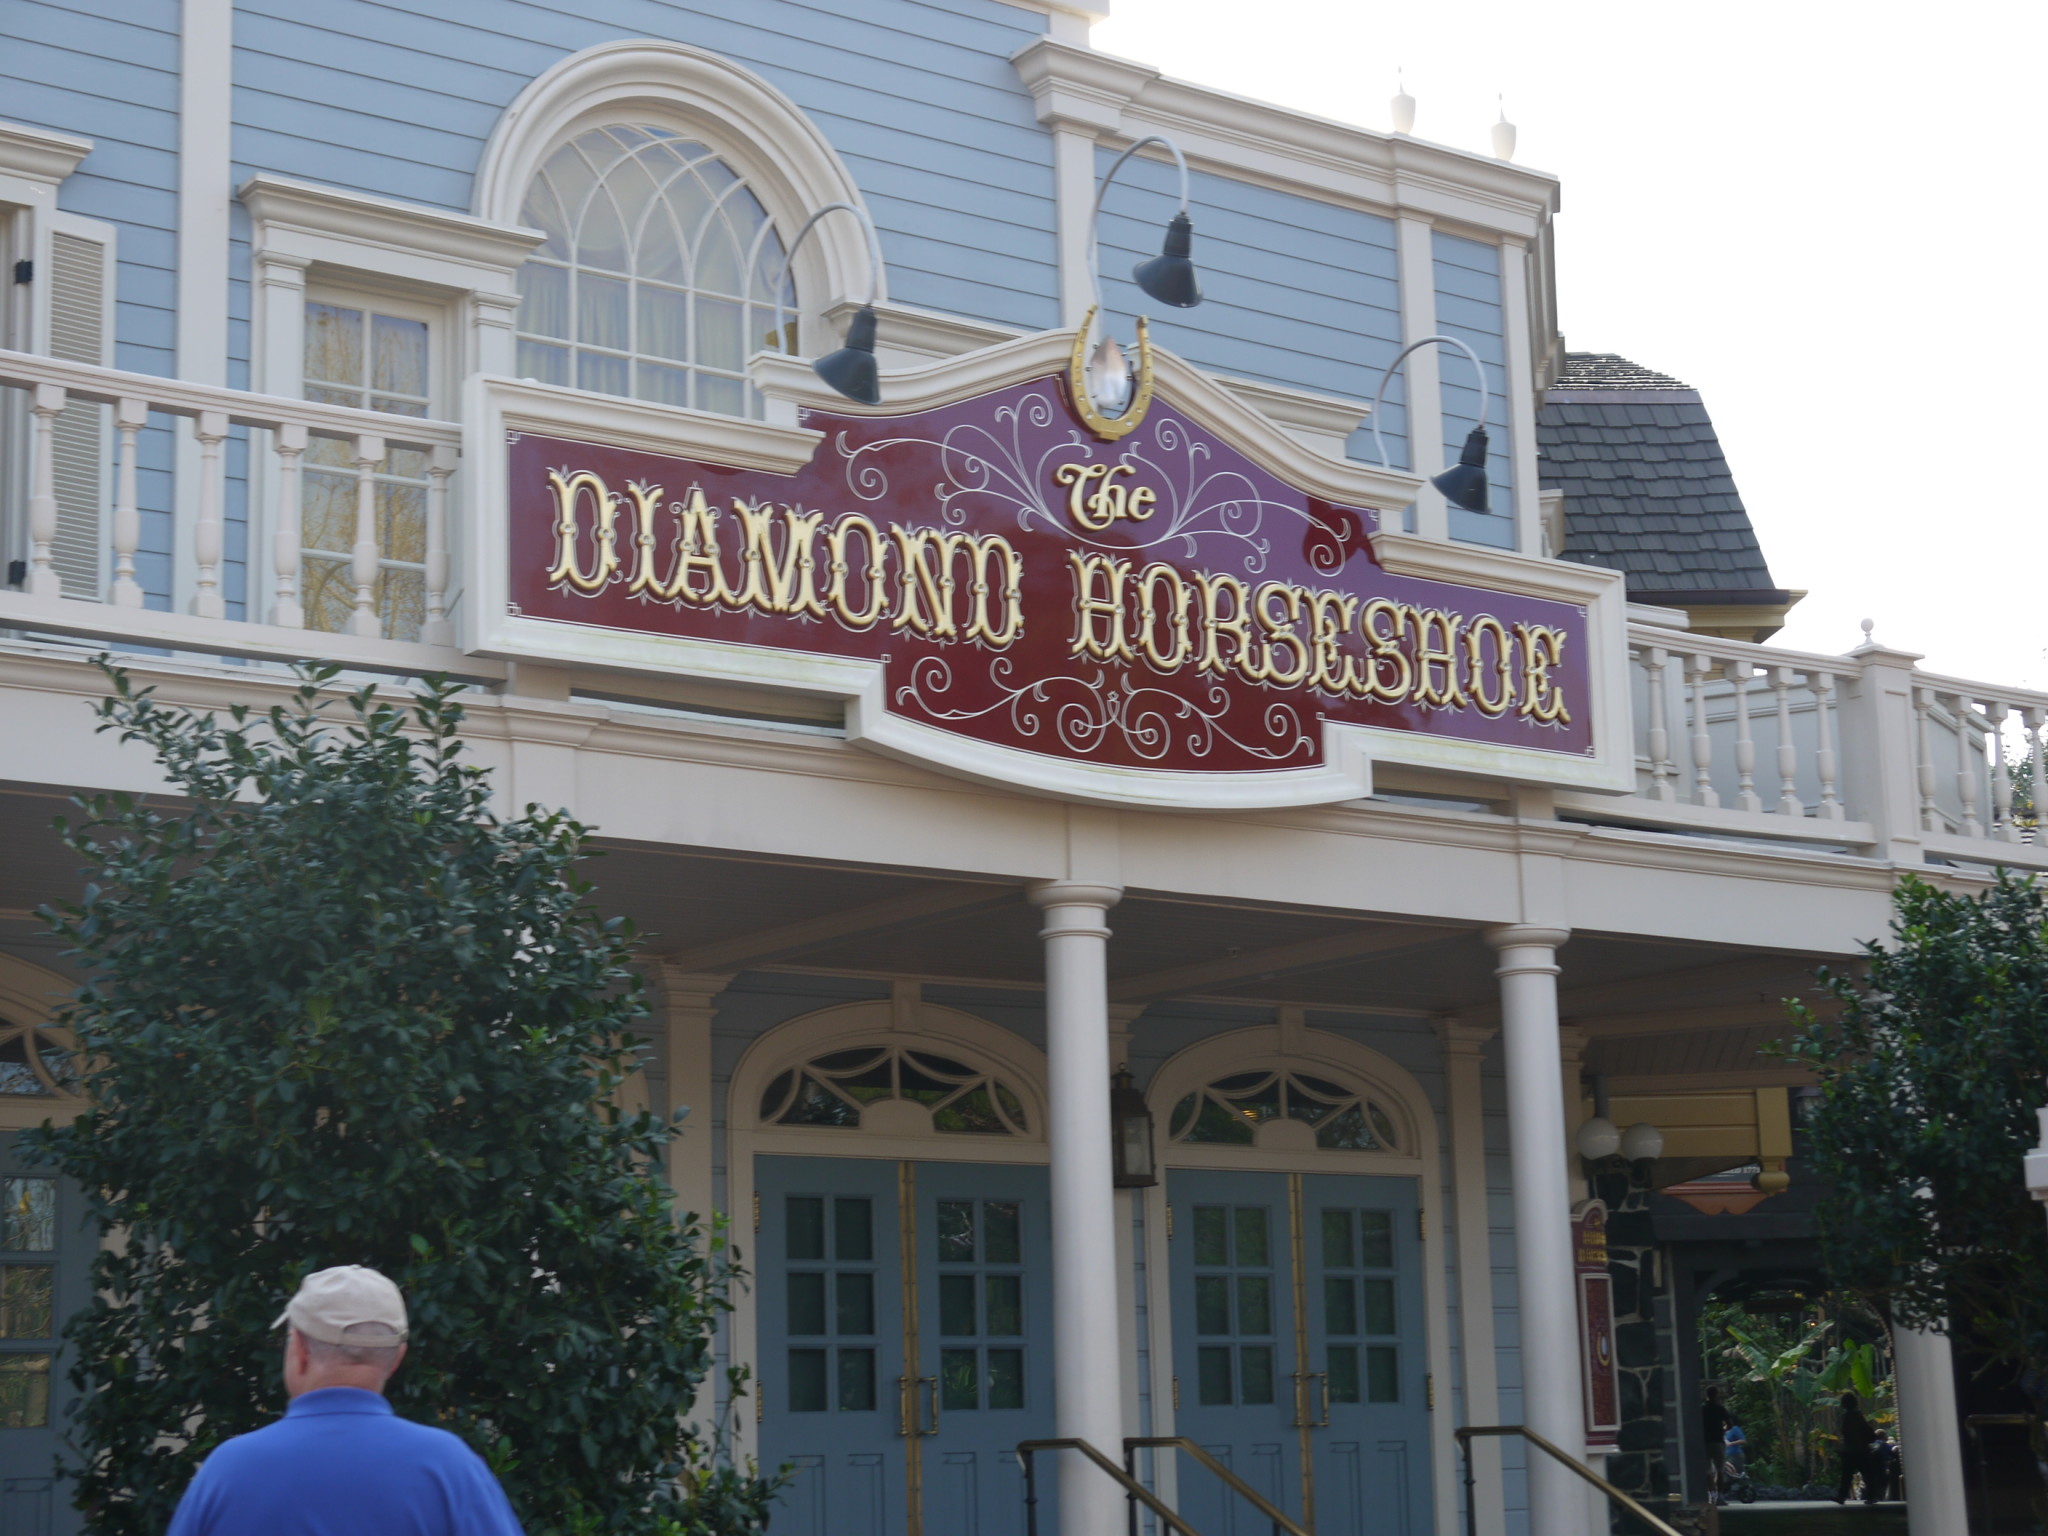 Two Old Restaurants Re-Open for a Limited Time at Disney World